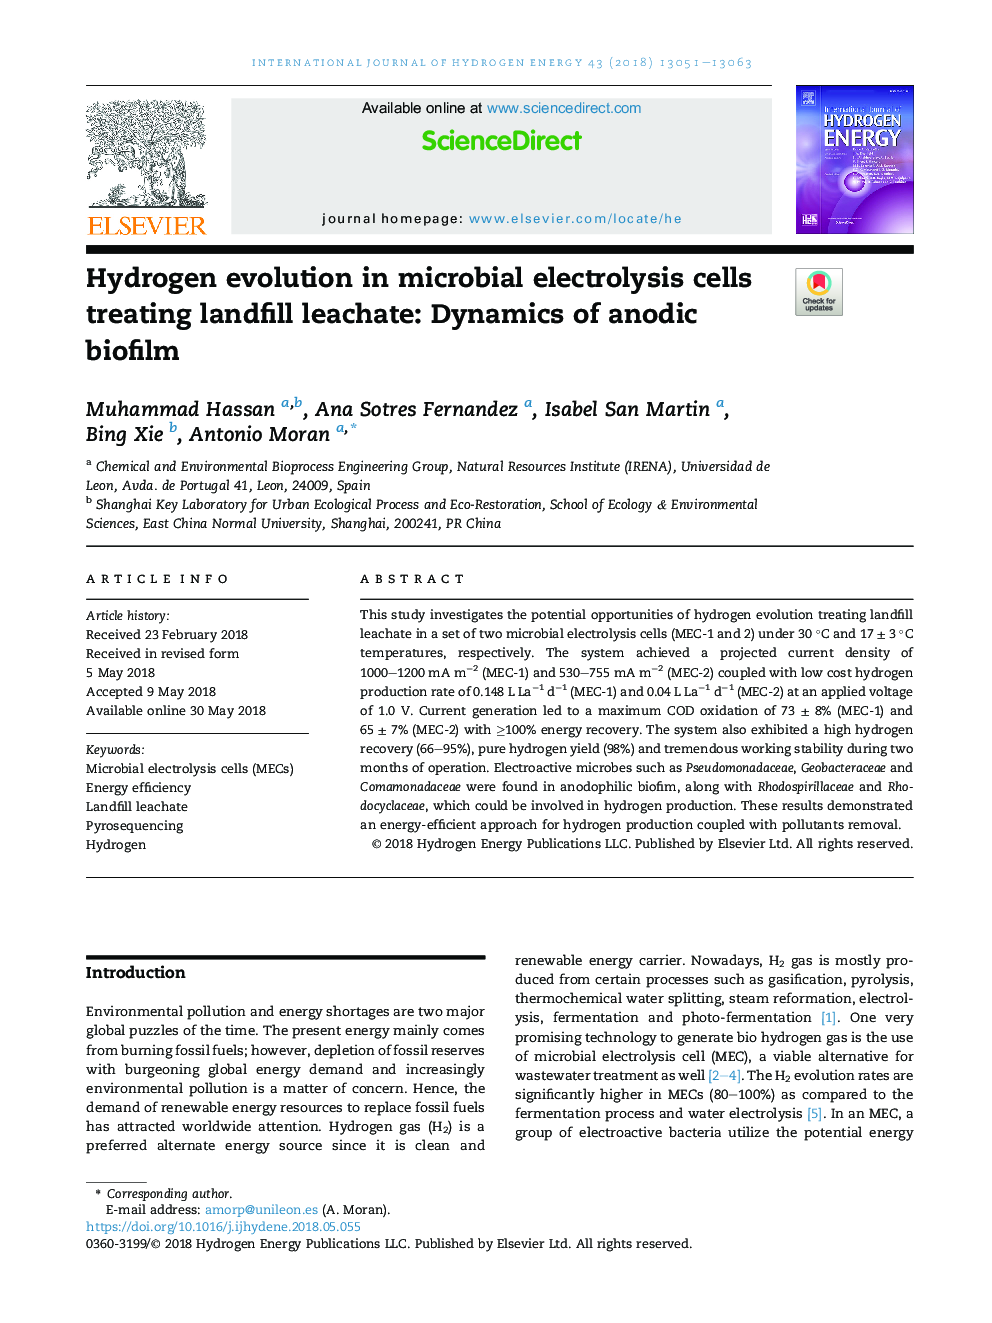 Hydrogen evolution in microbial electrolysis cells treating landfill leachate: Dynamics of anodic biofilm